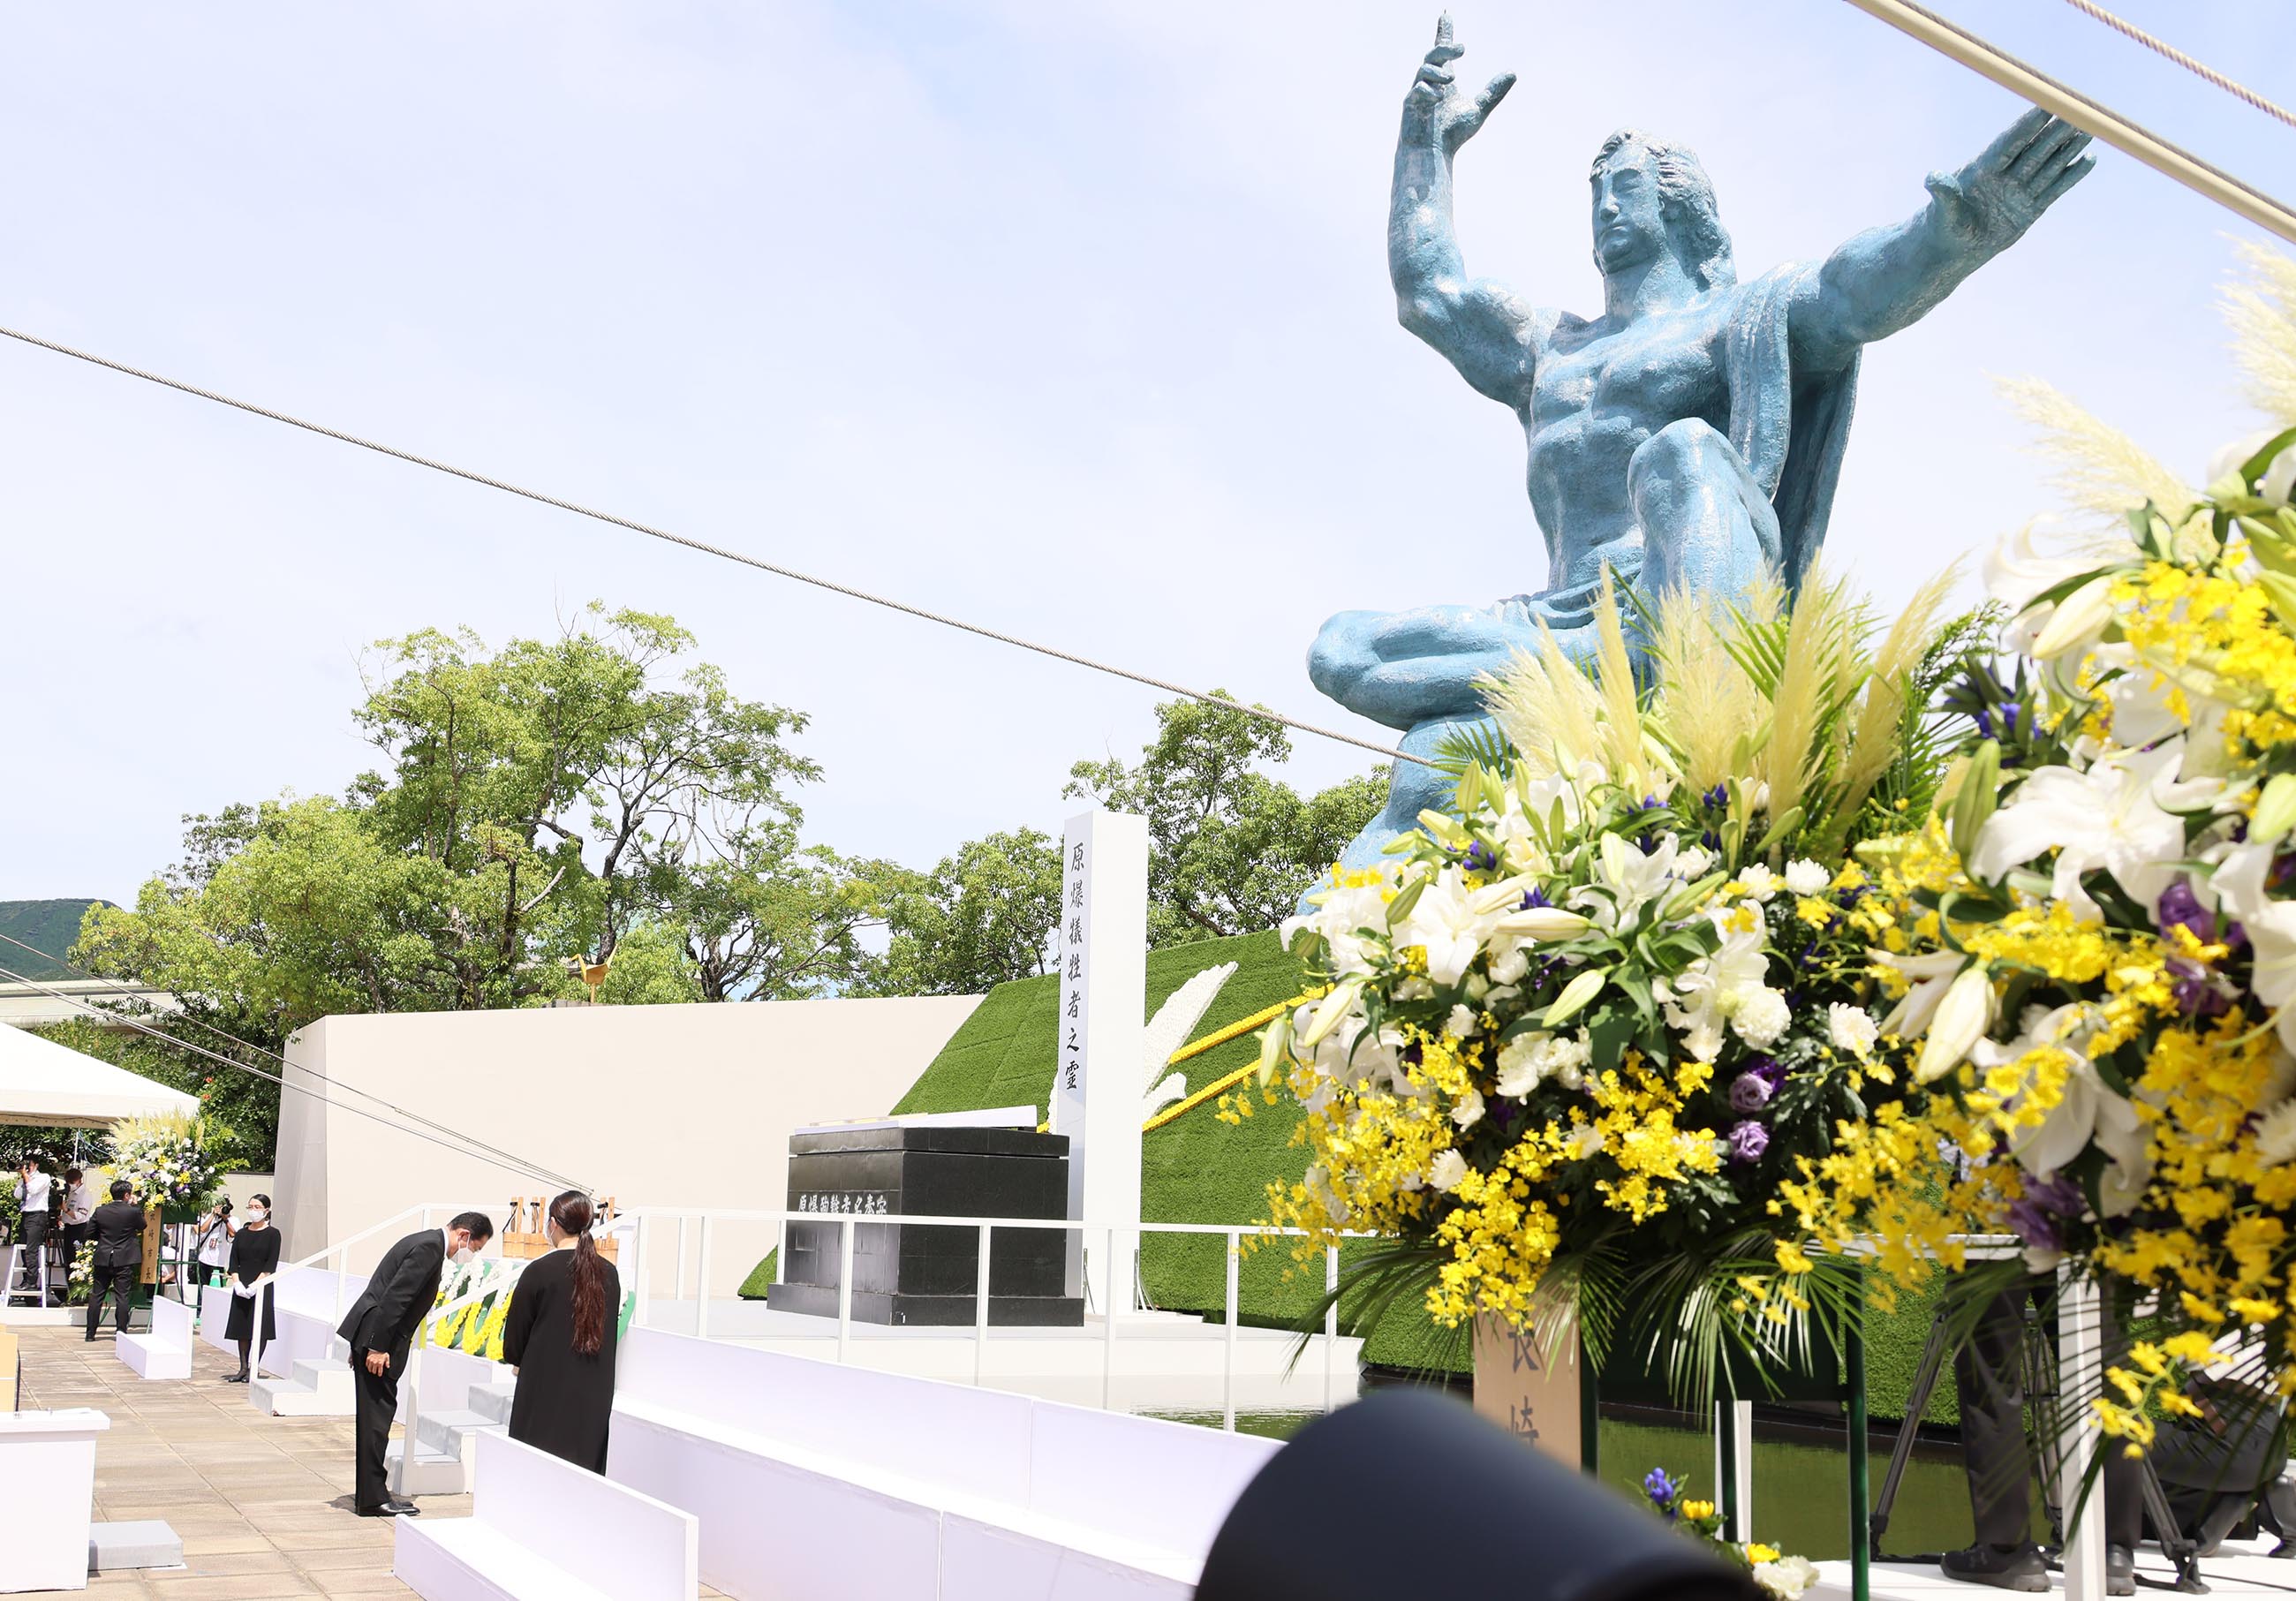 Nagasaki Peace Memorial Ceremony and Other Events